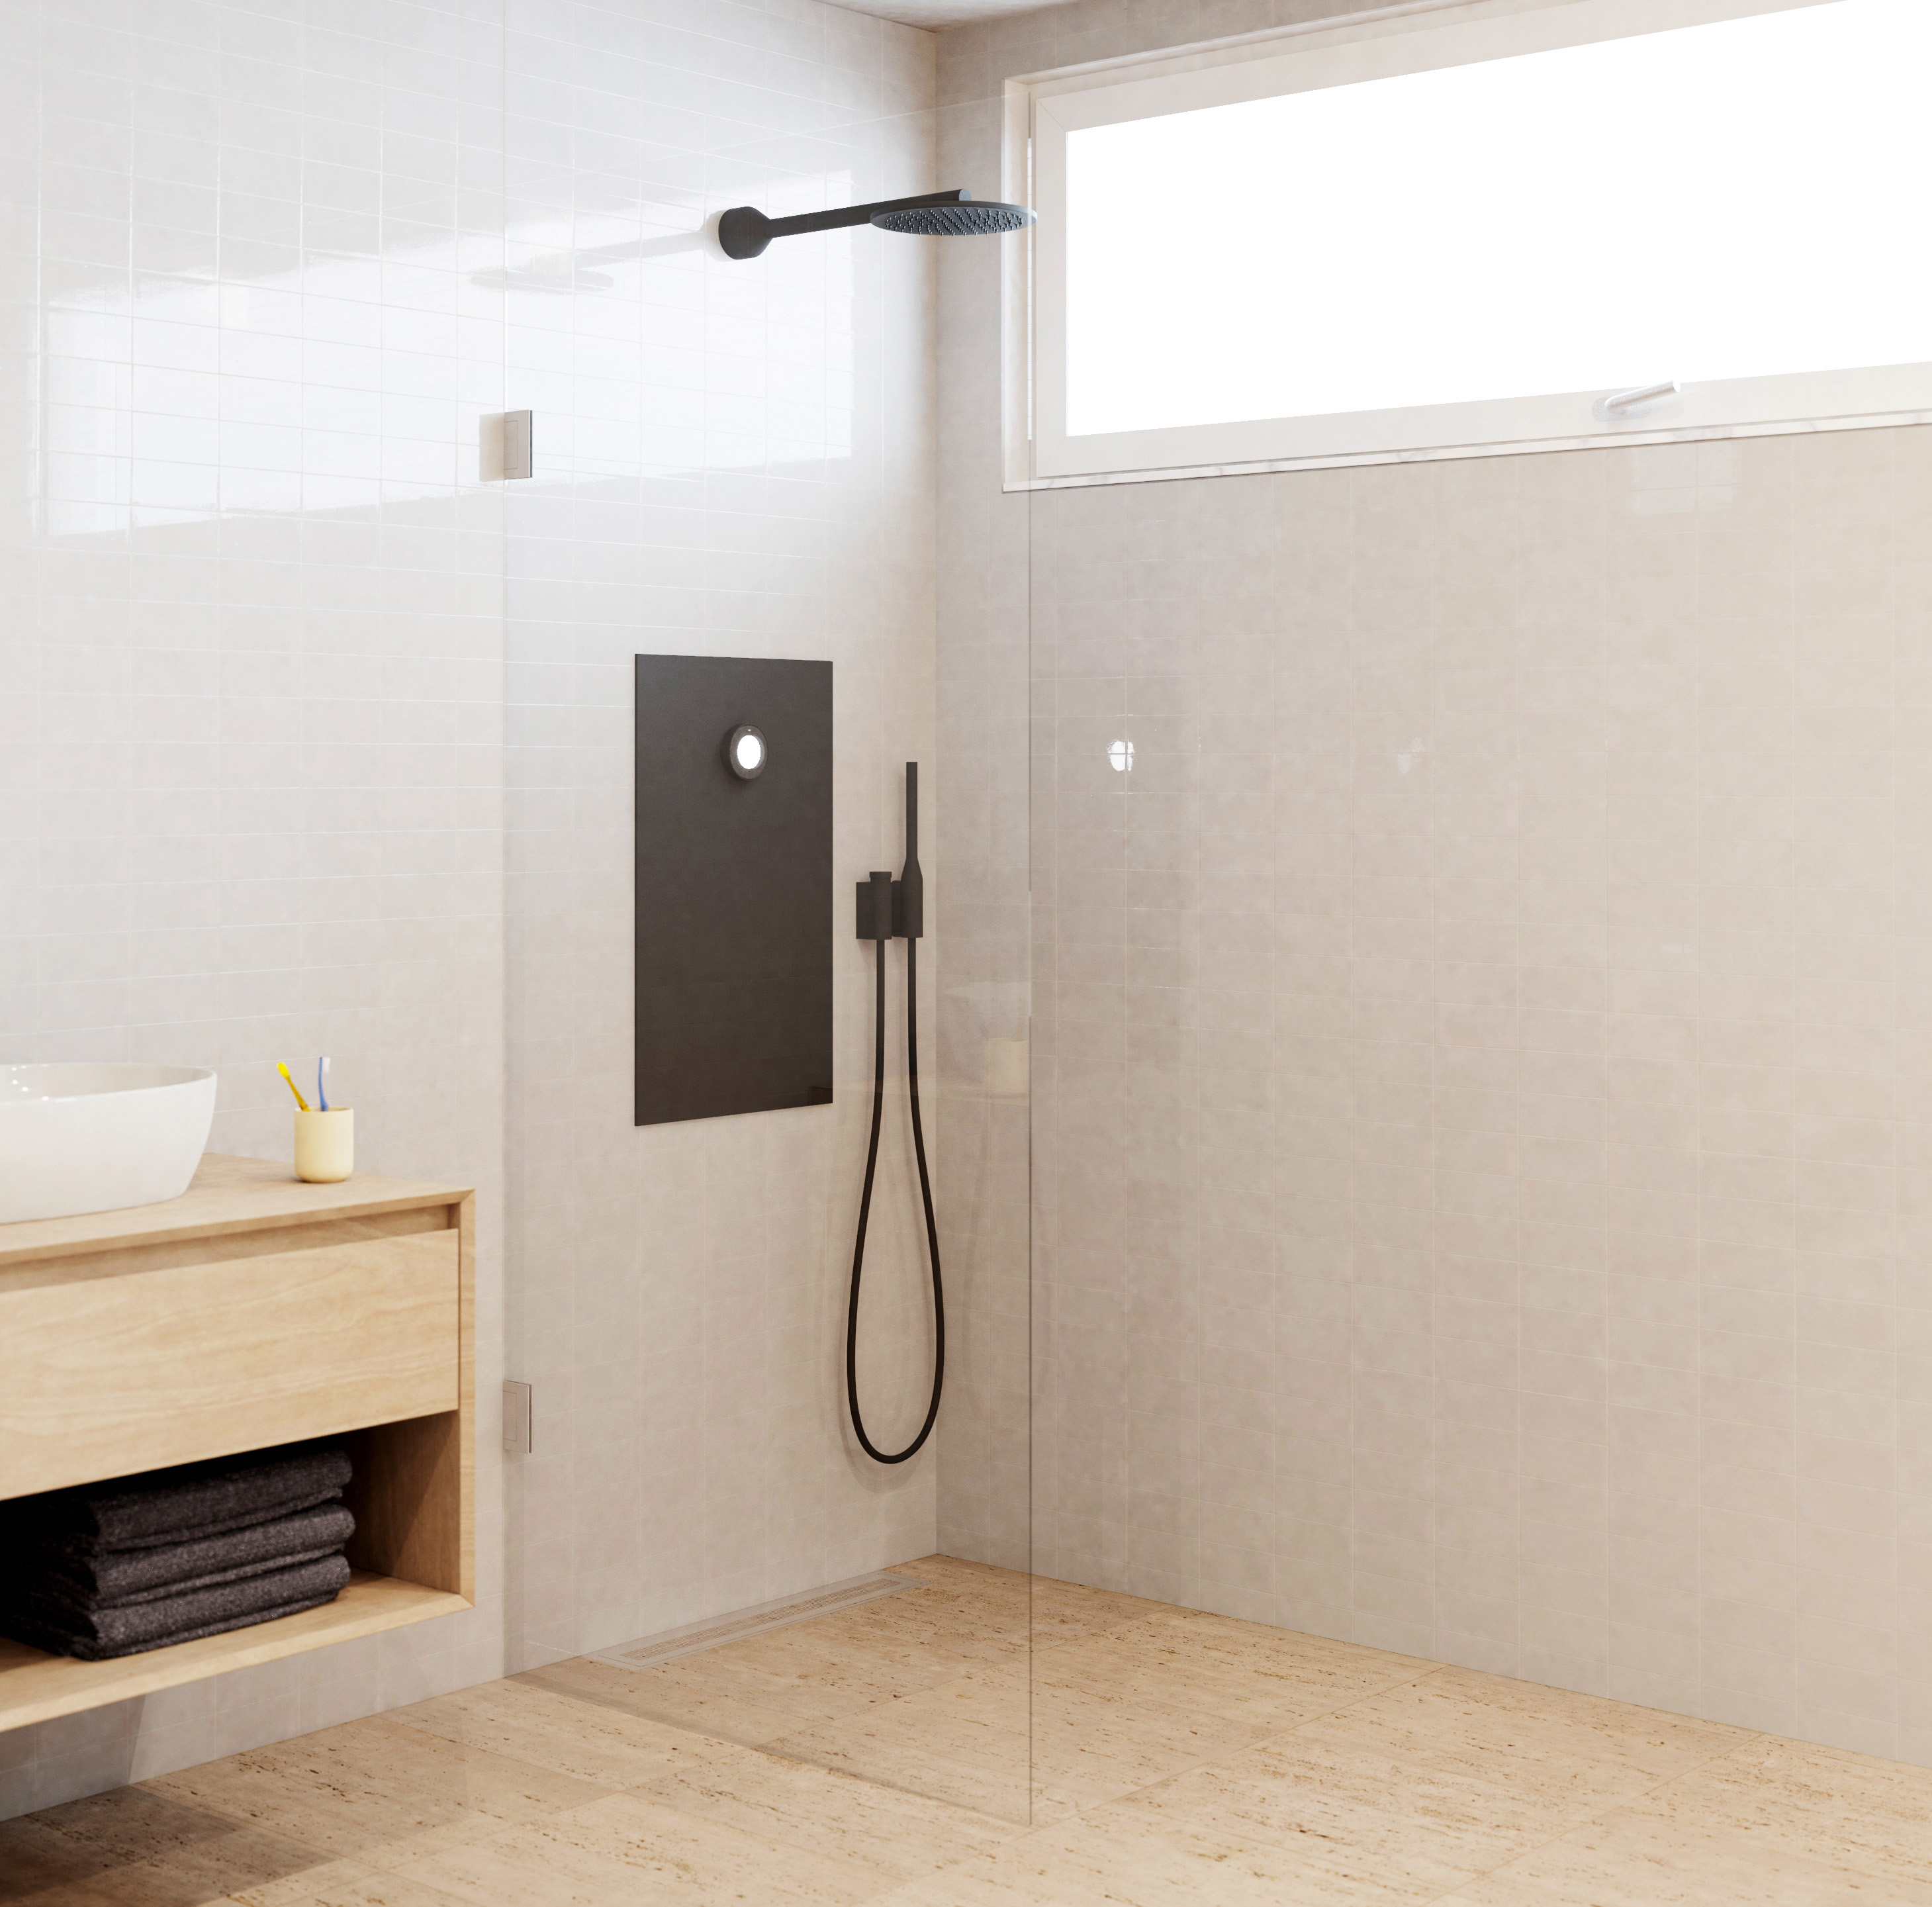 Revolutionize Your Shower Experience: Plumbing Loop for Multiple Shower Heads